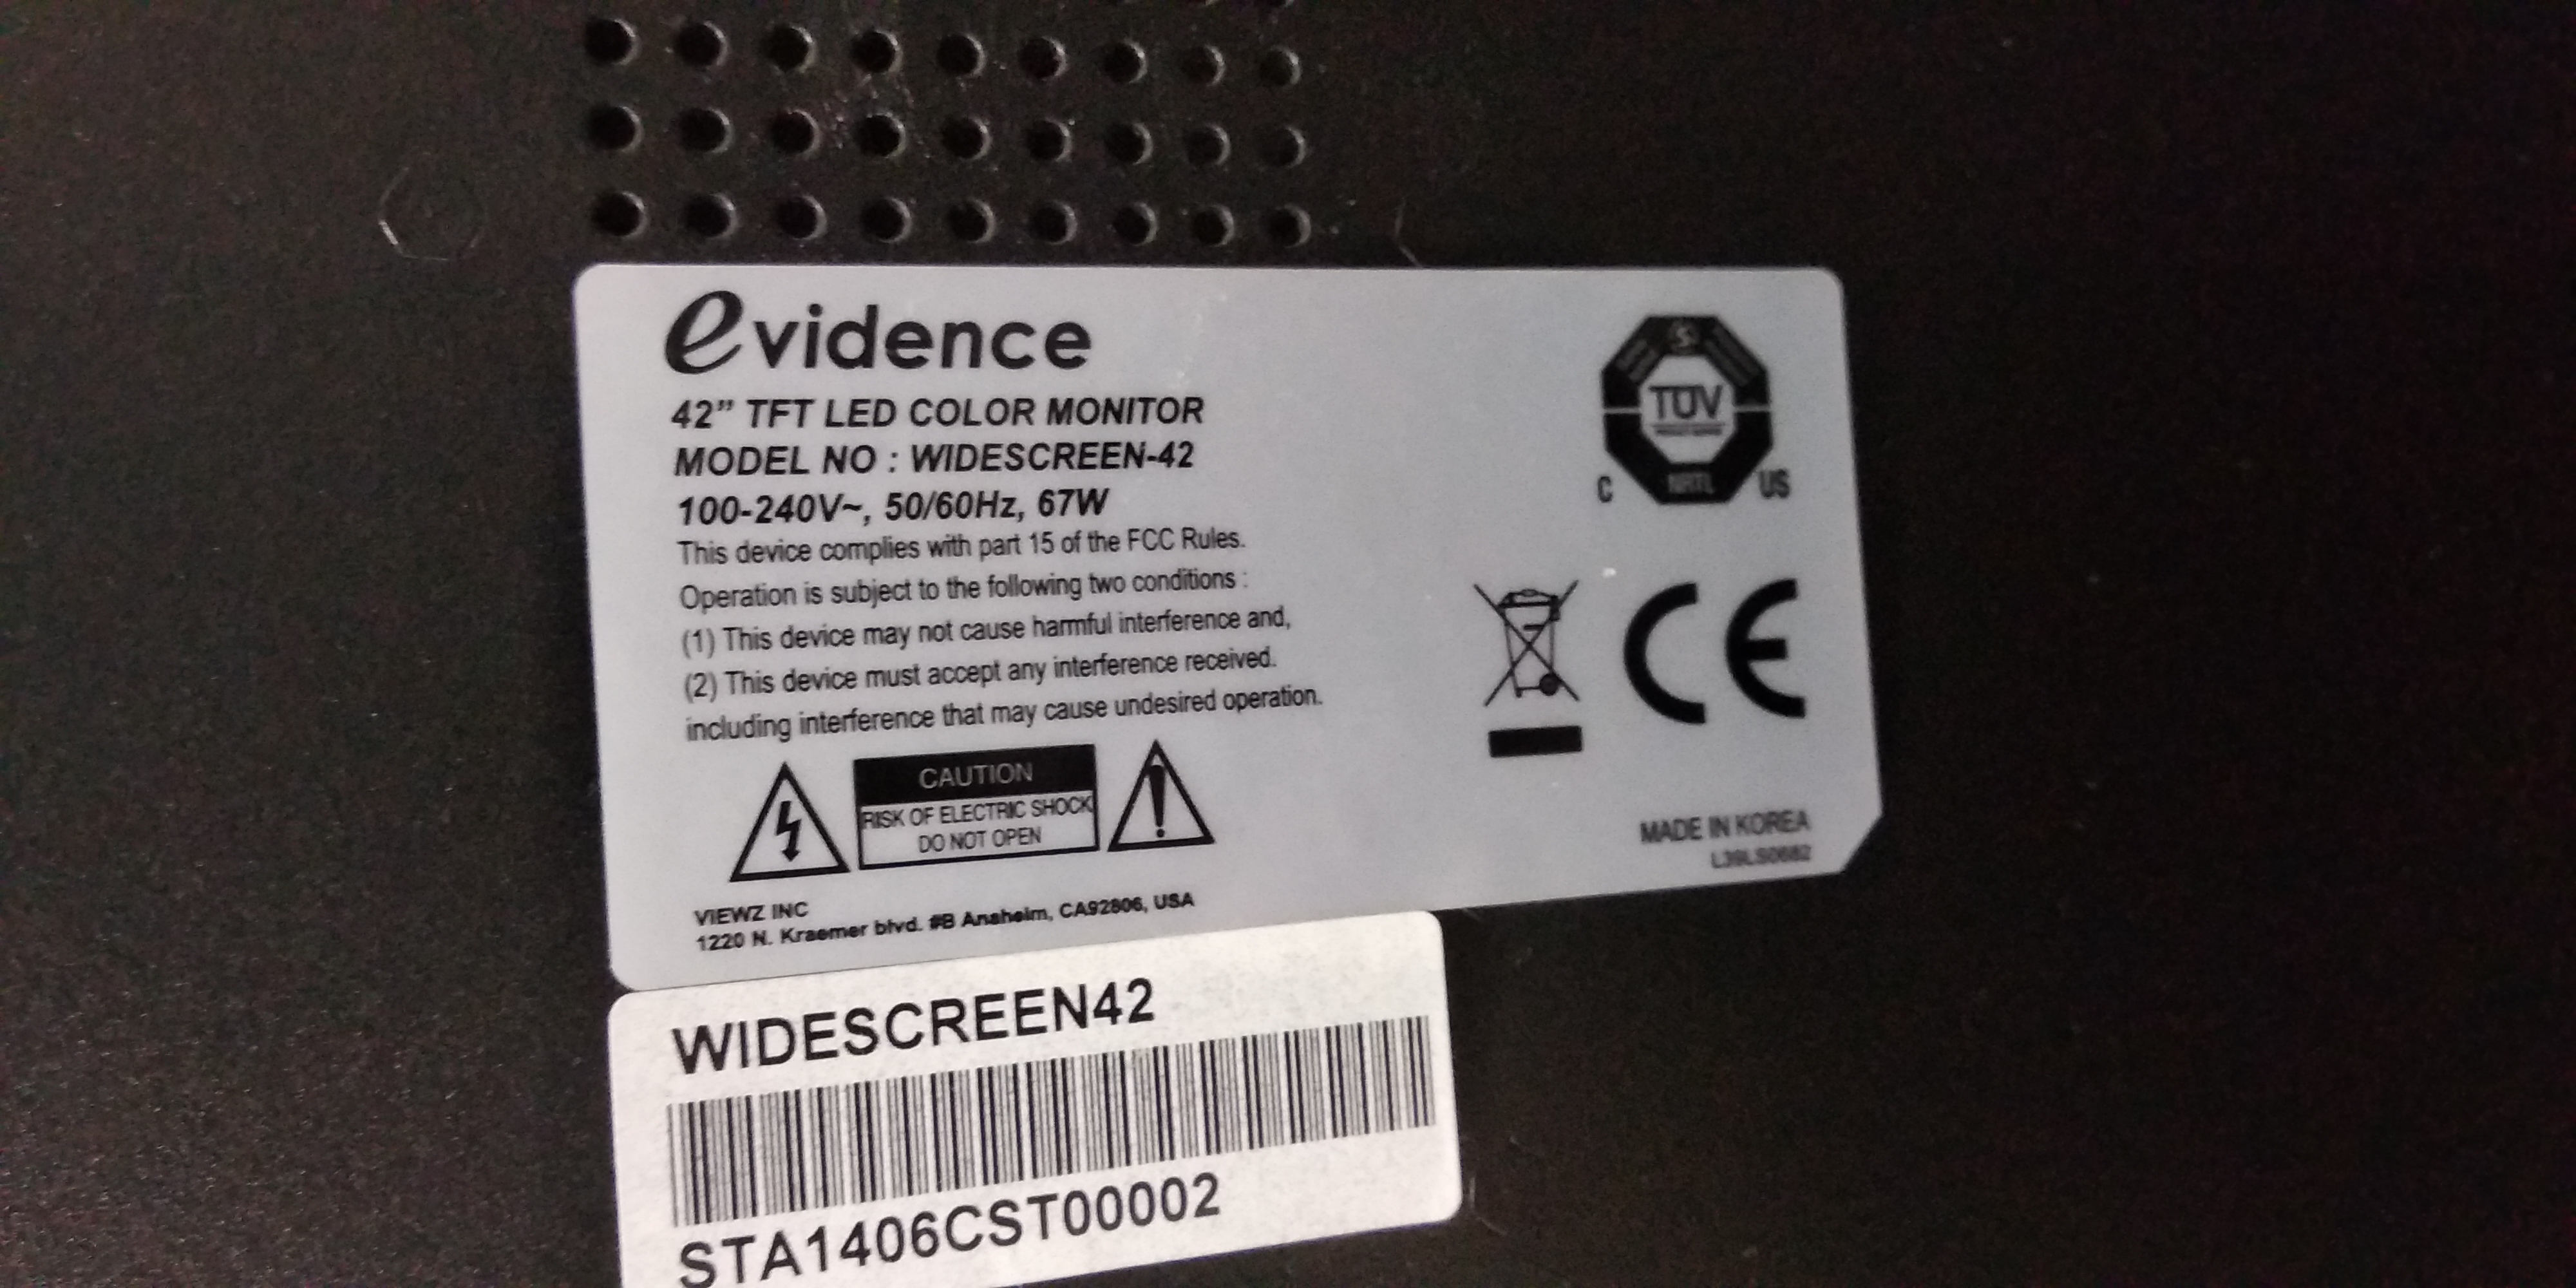  Evidence  WIDESCREEN-42,  PWB-L4212